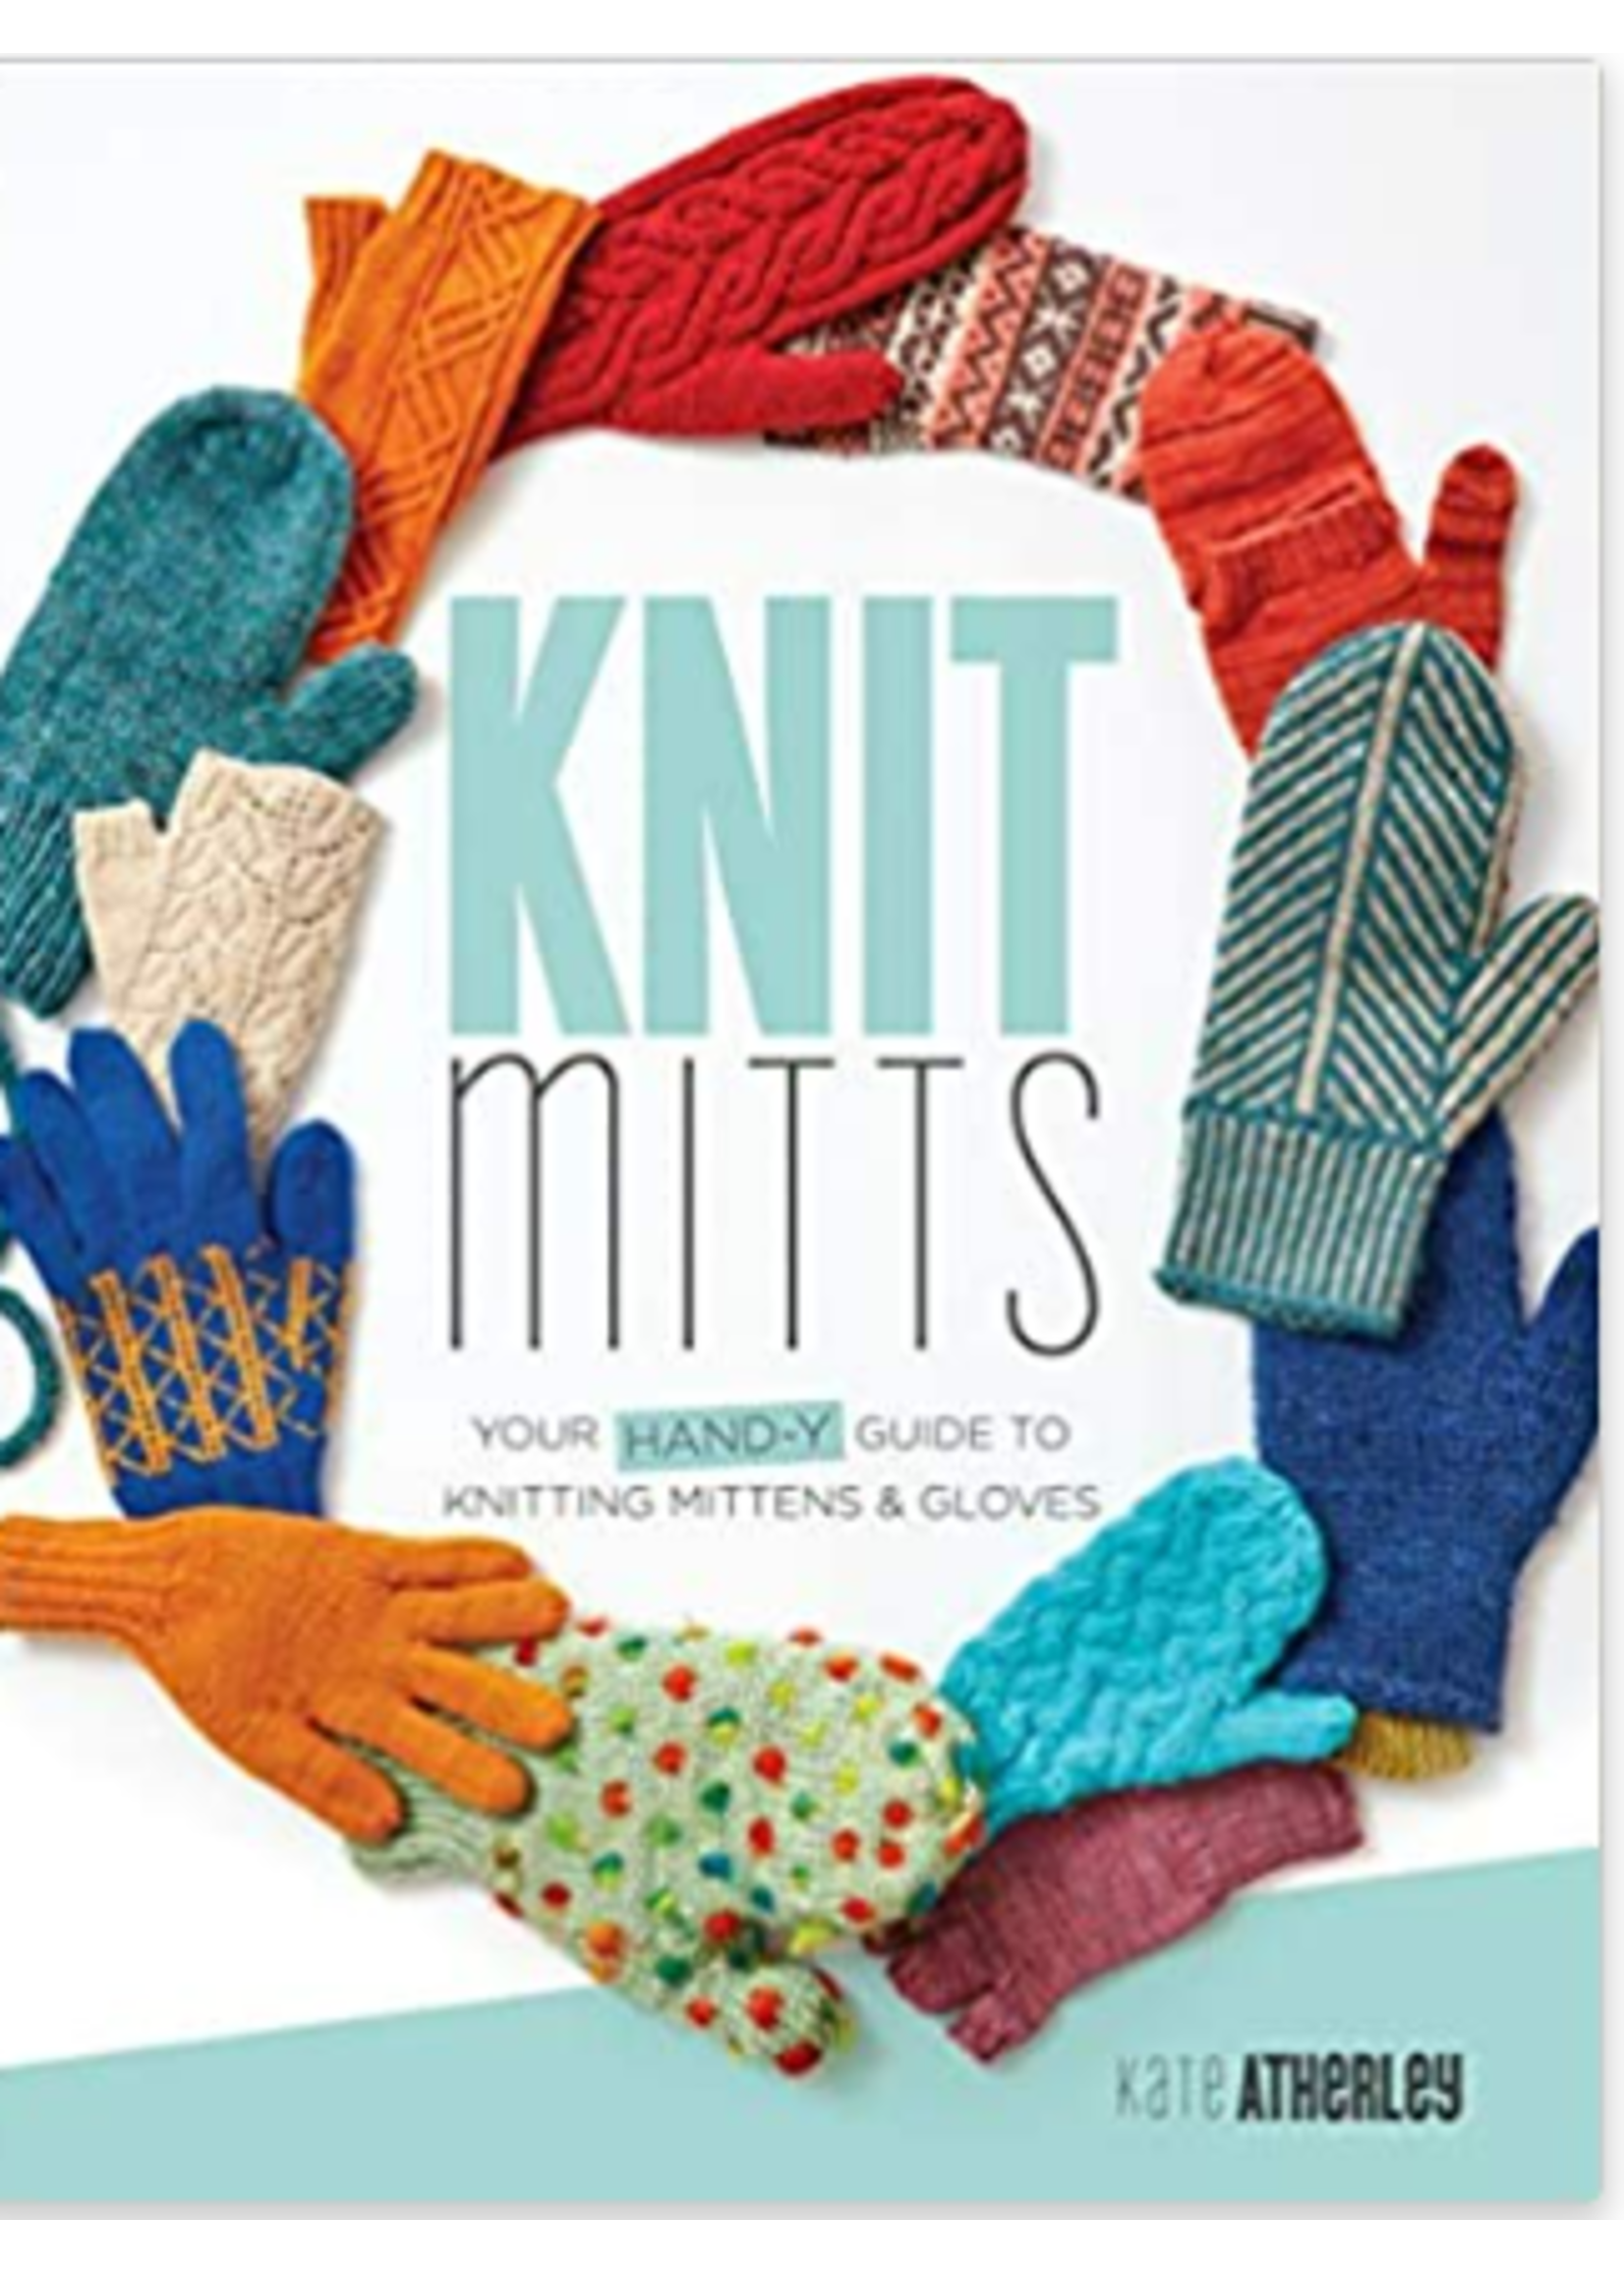 Knit Mitts by Kate Atherly